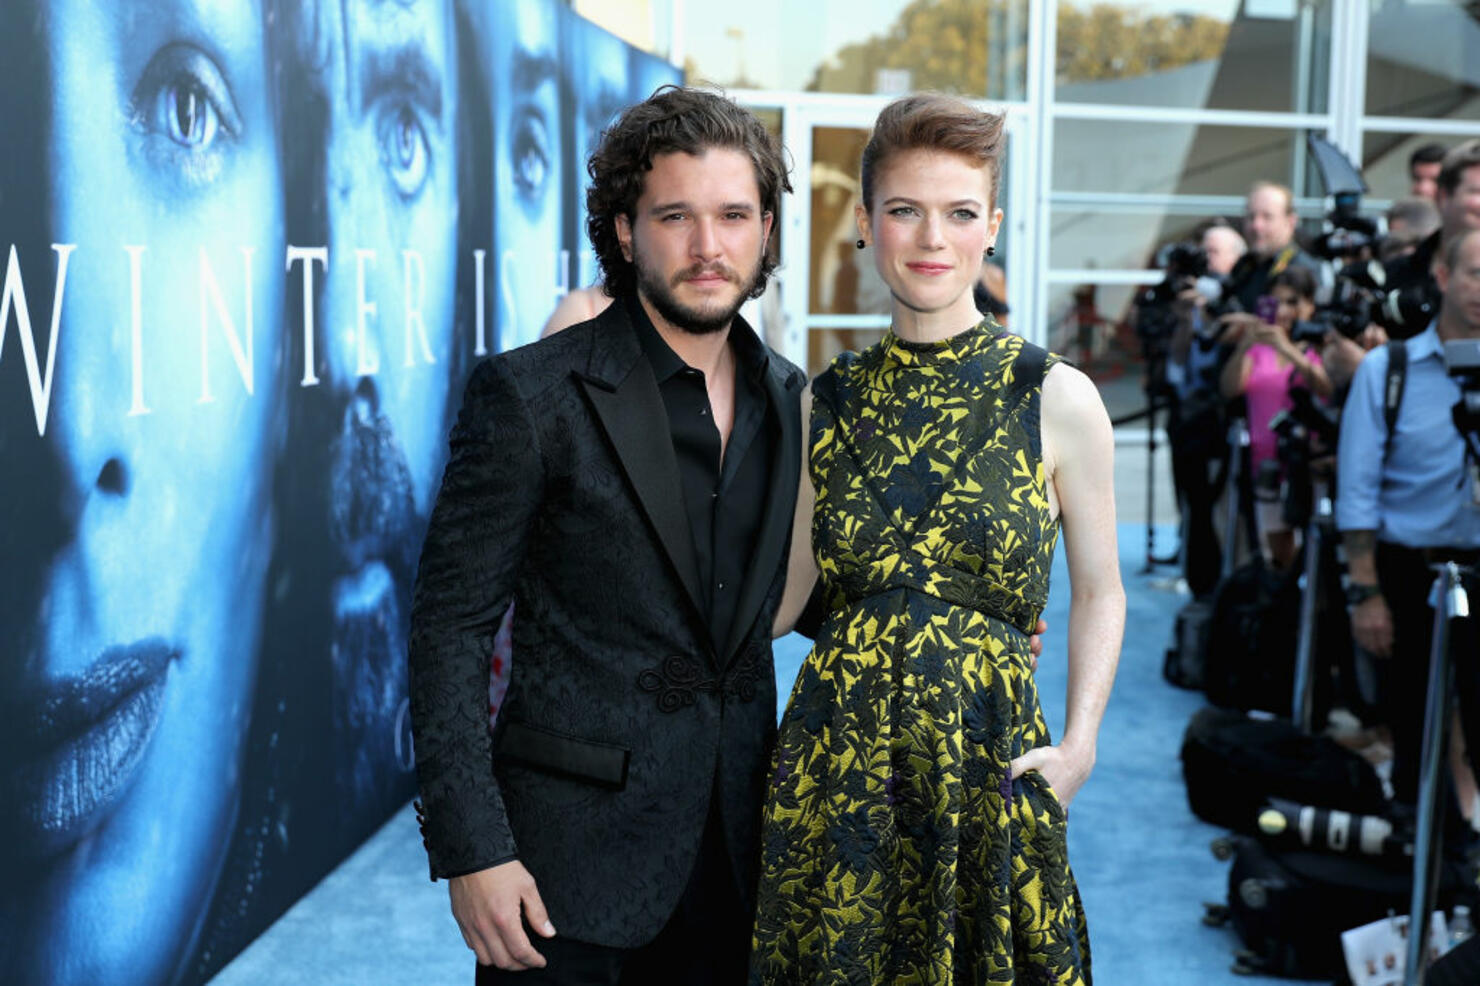 Premiere Of HBO's "Game Of Thrones" Season 7 - Red Carpet